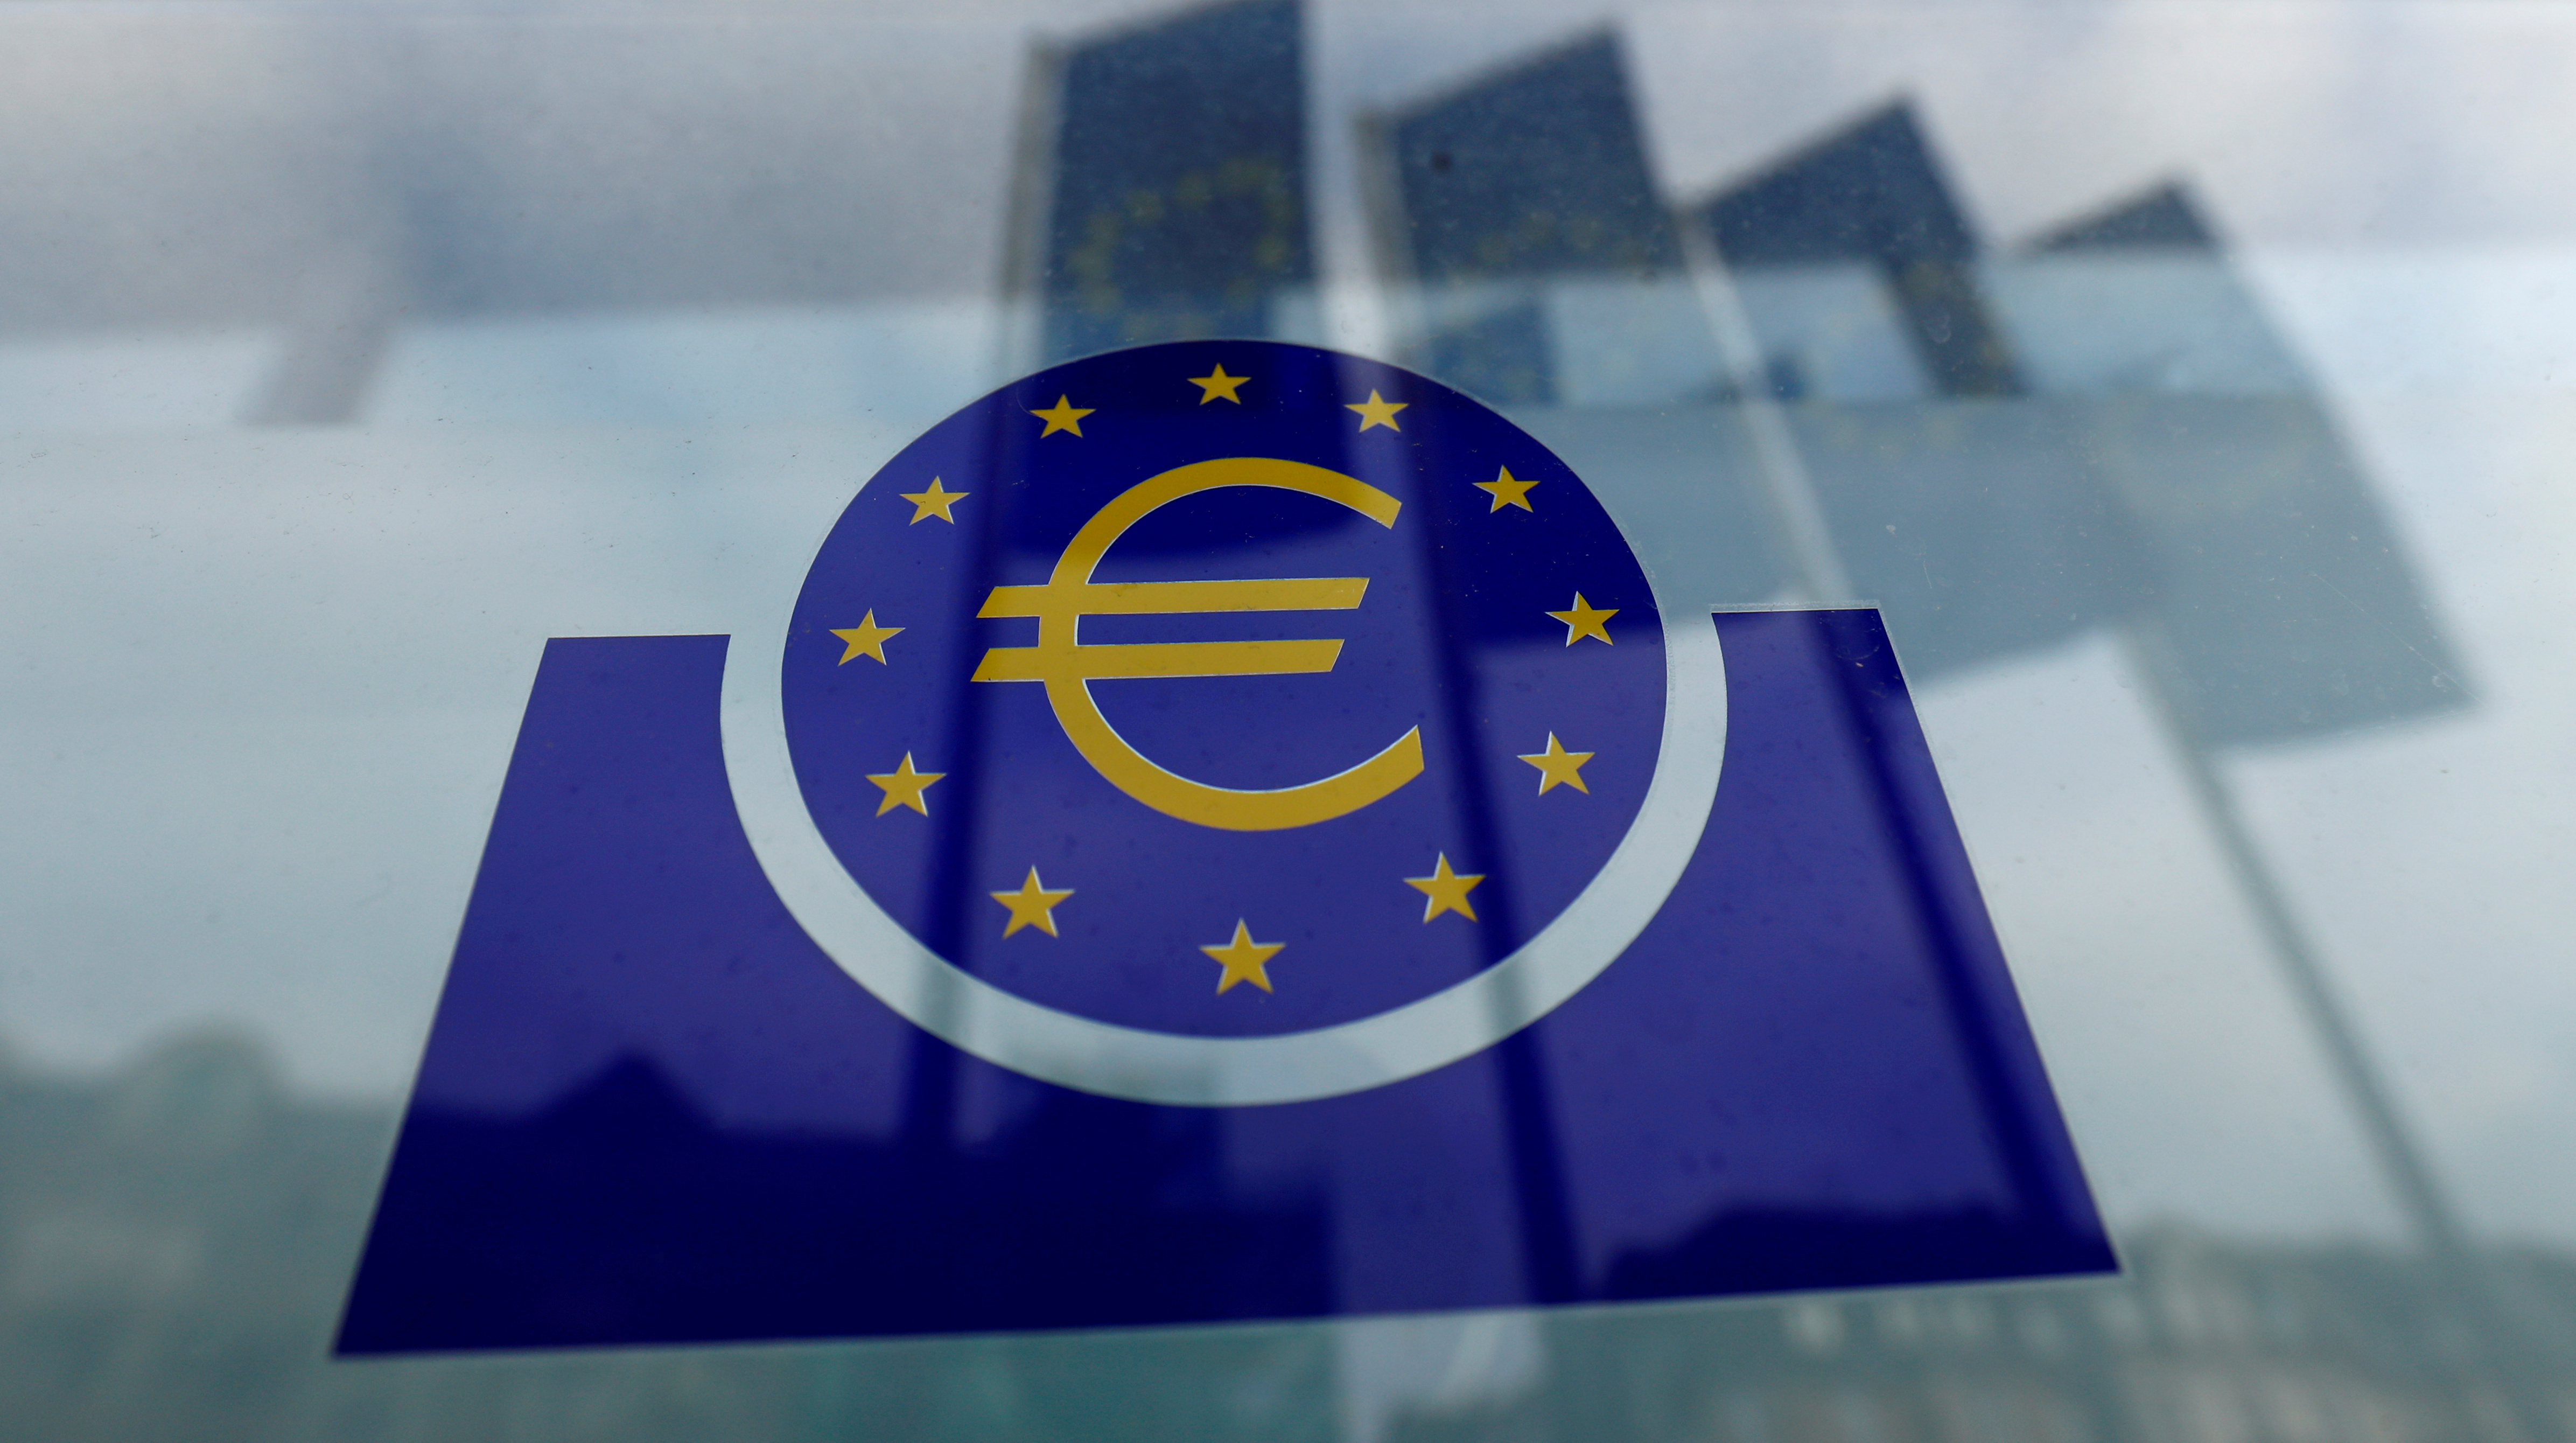 10% of Eurozone Households Own Cryptocurrency: ECB Survey